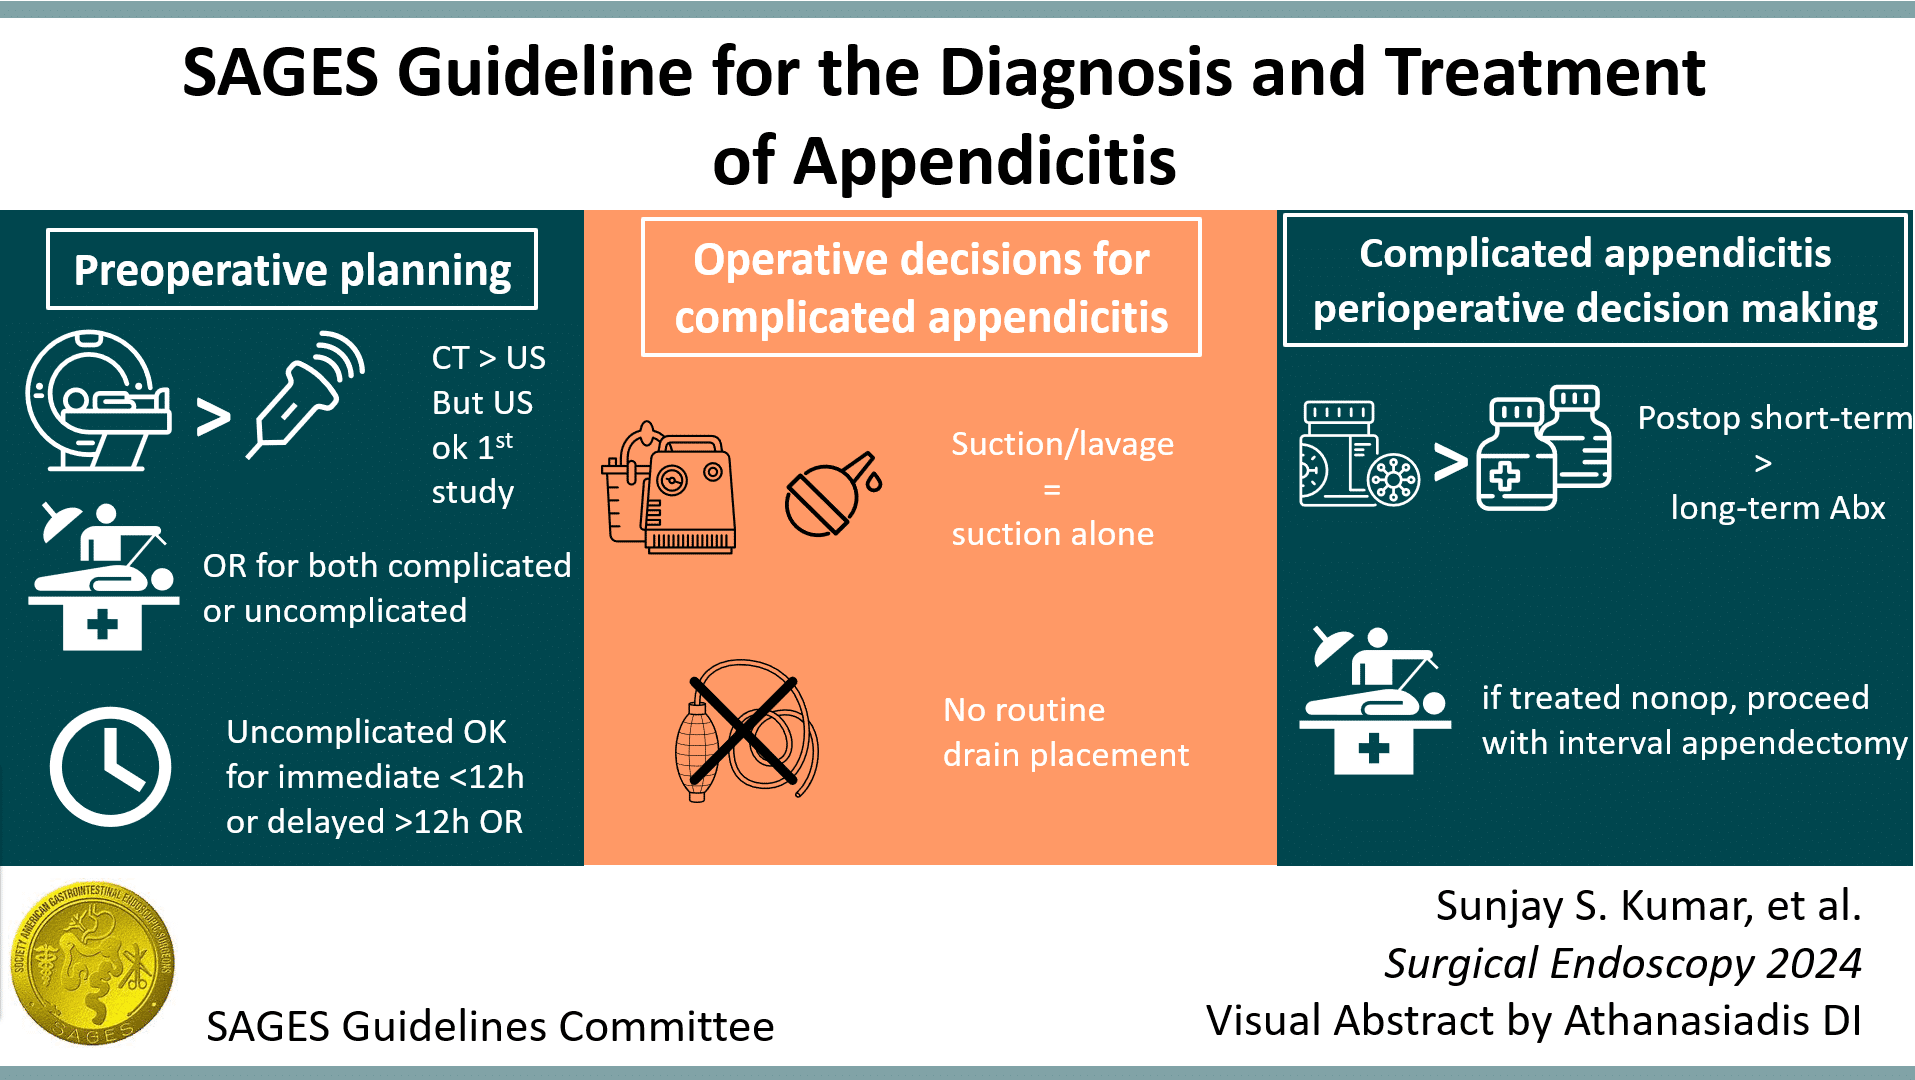 Infographic for SAGES Guideline for the Diagnosis and Treatment of Appendicitis covering the results of the review.